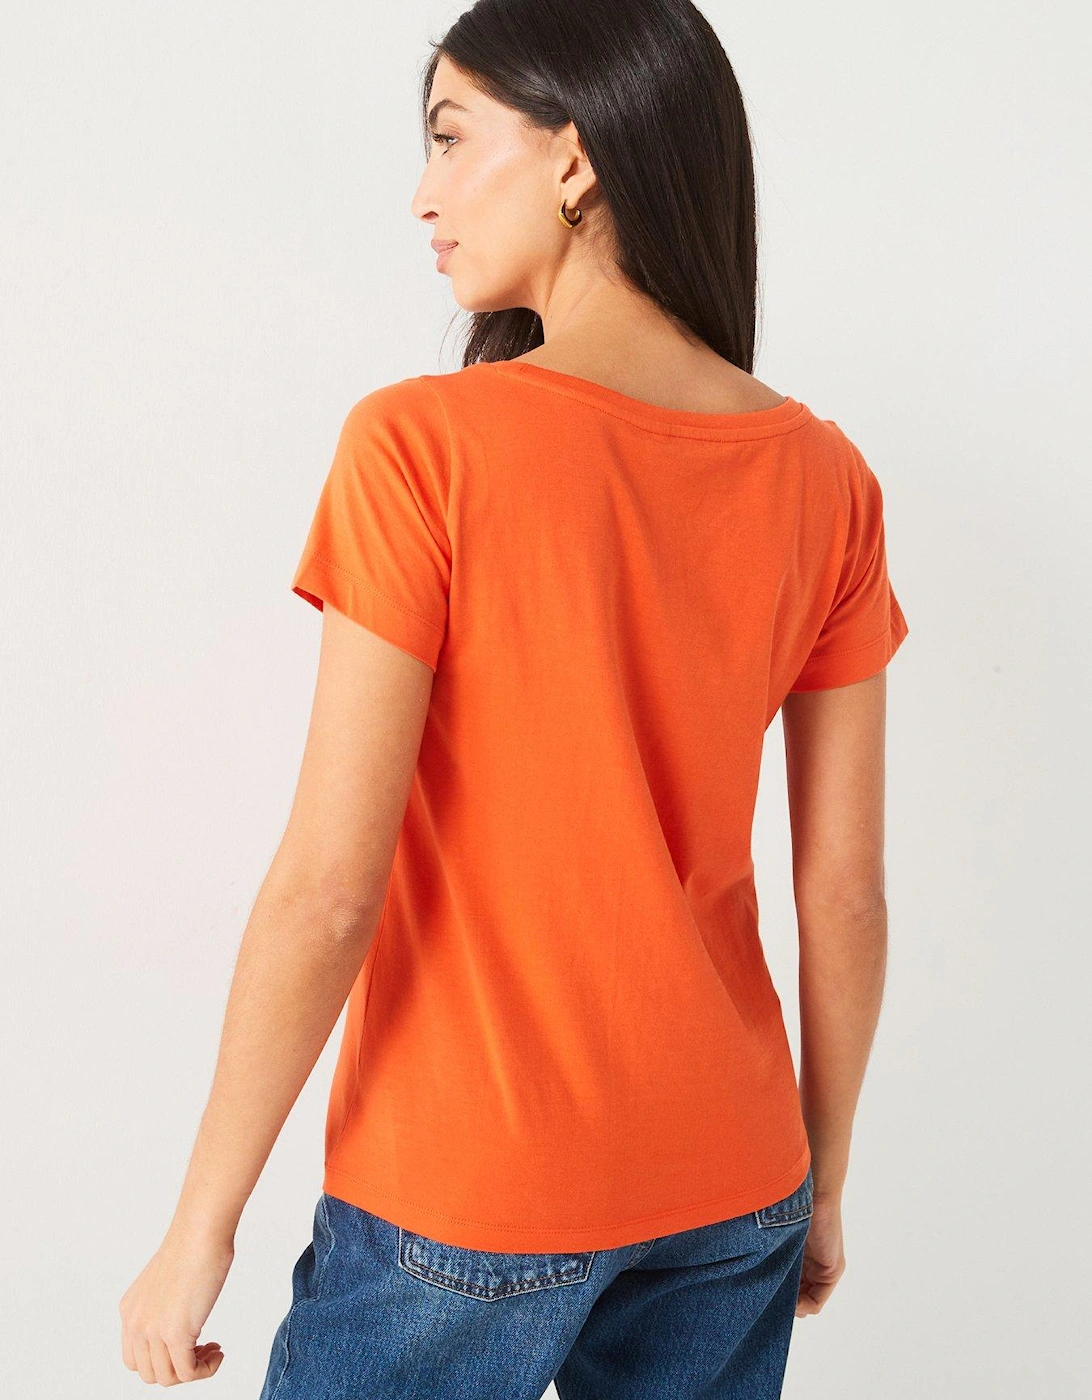 The Essential Scoop Neck T-shirt